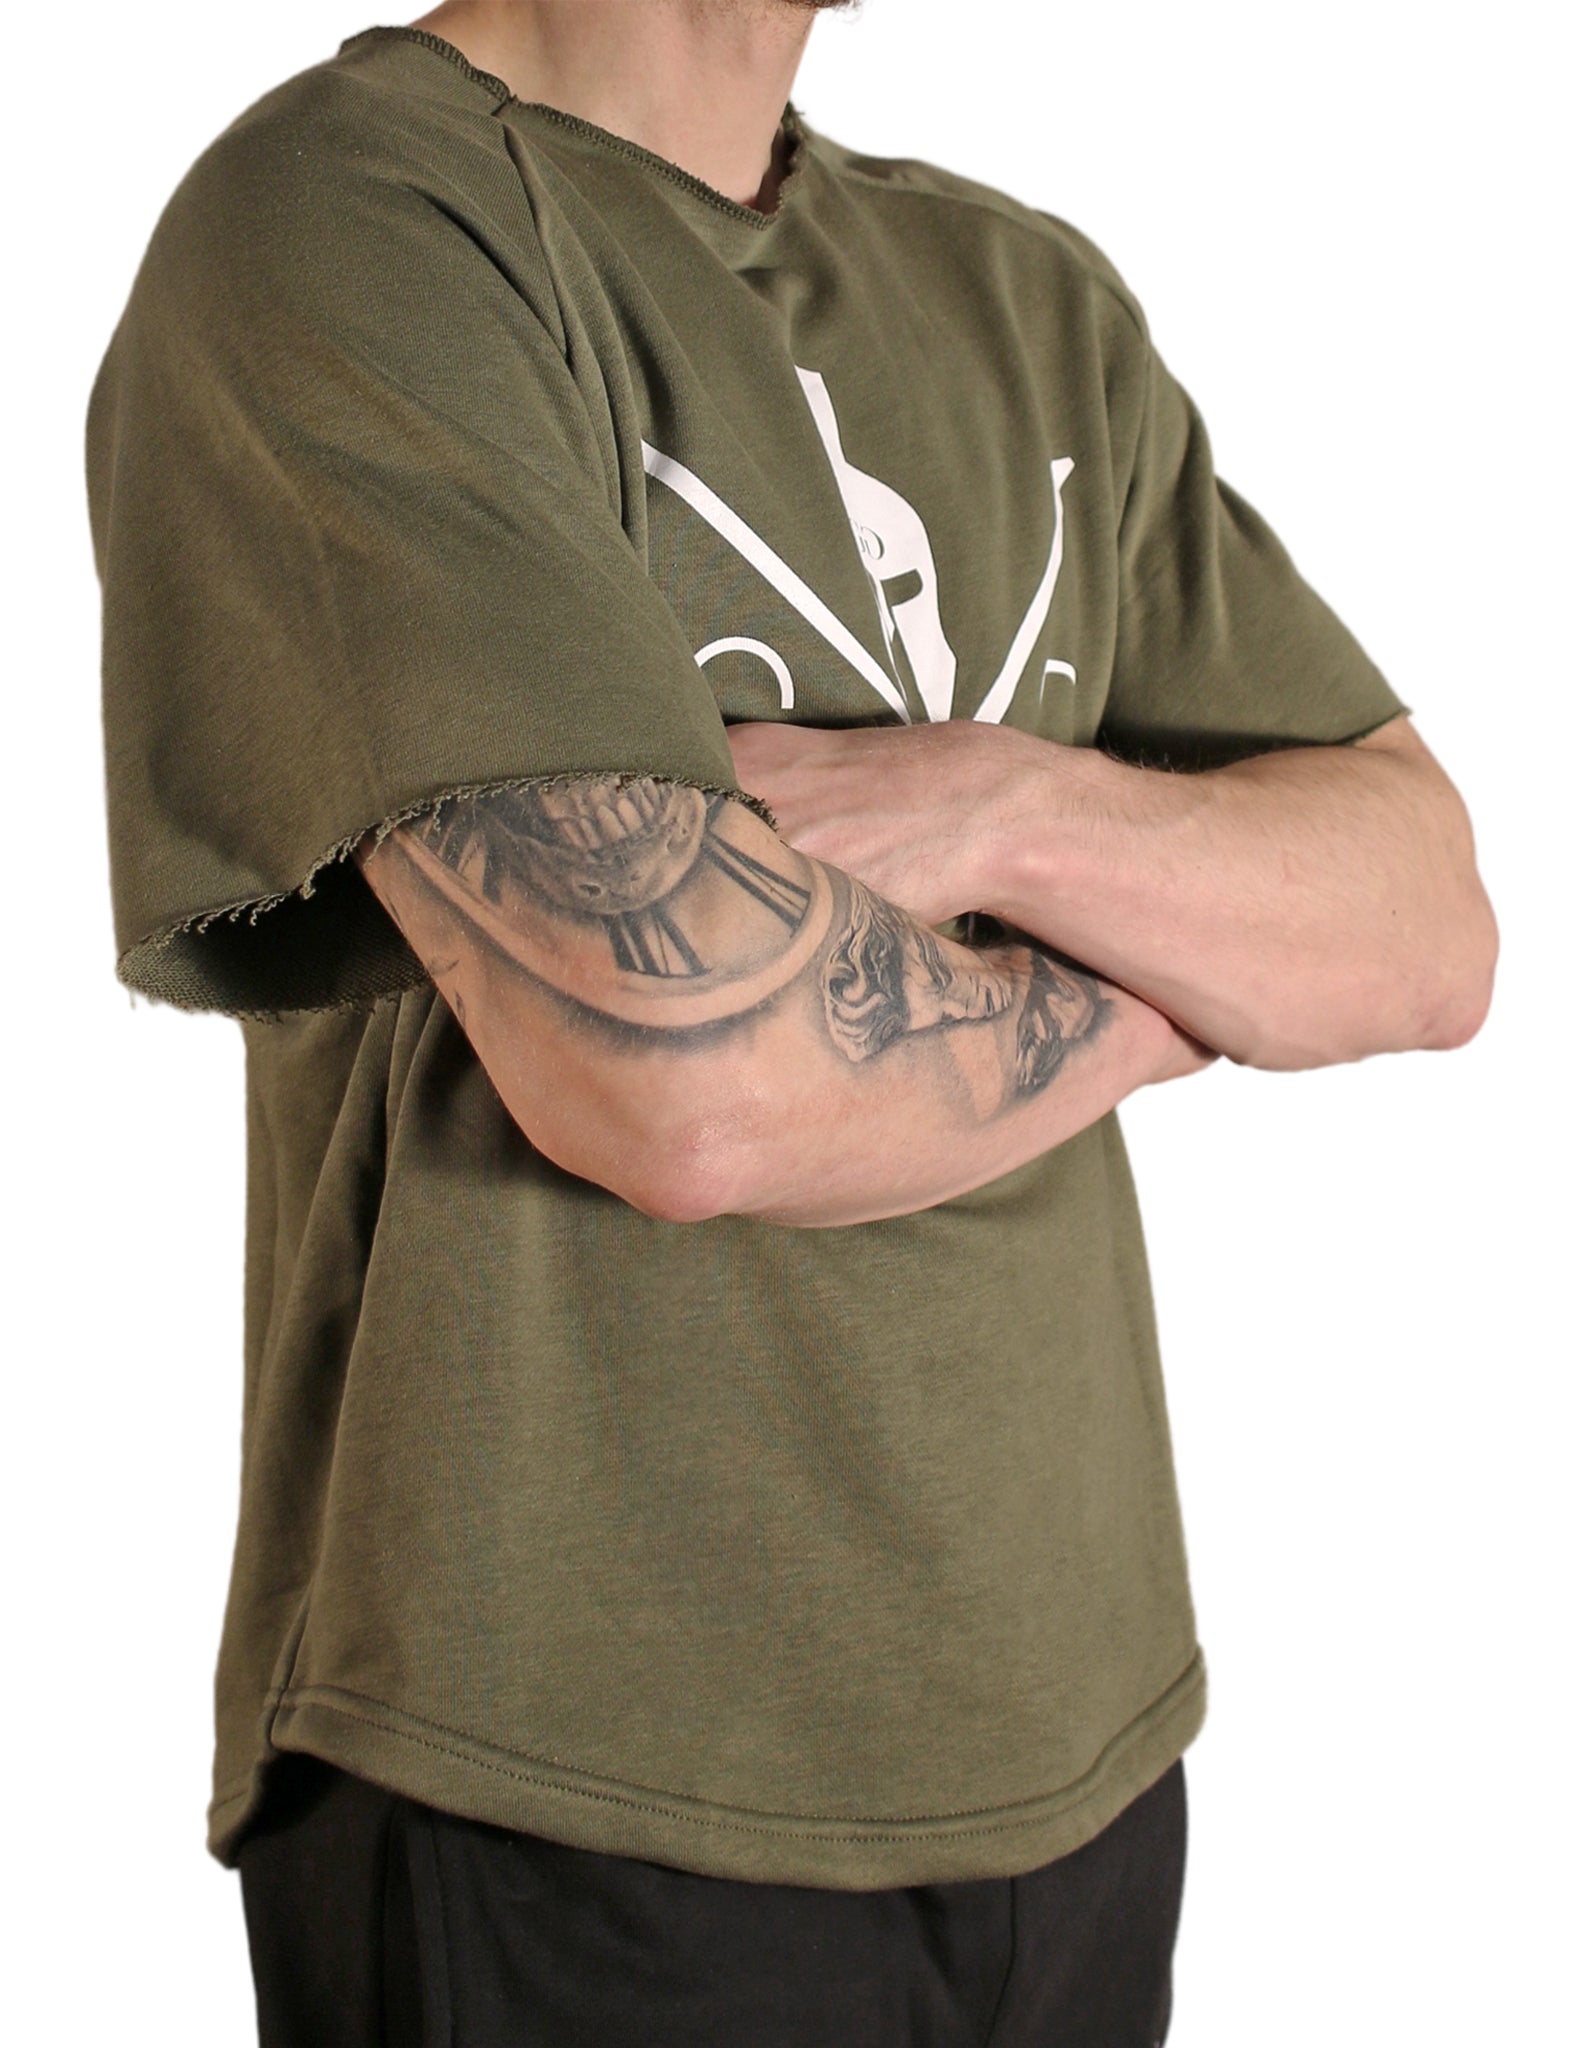 Oversized Pump Cover Shirt - Olive - Gym Generation®-7640171168524-www.gymgeneration.ch